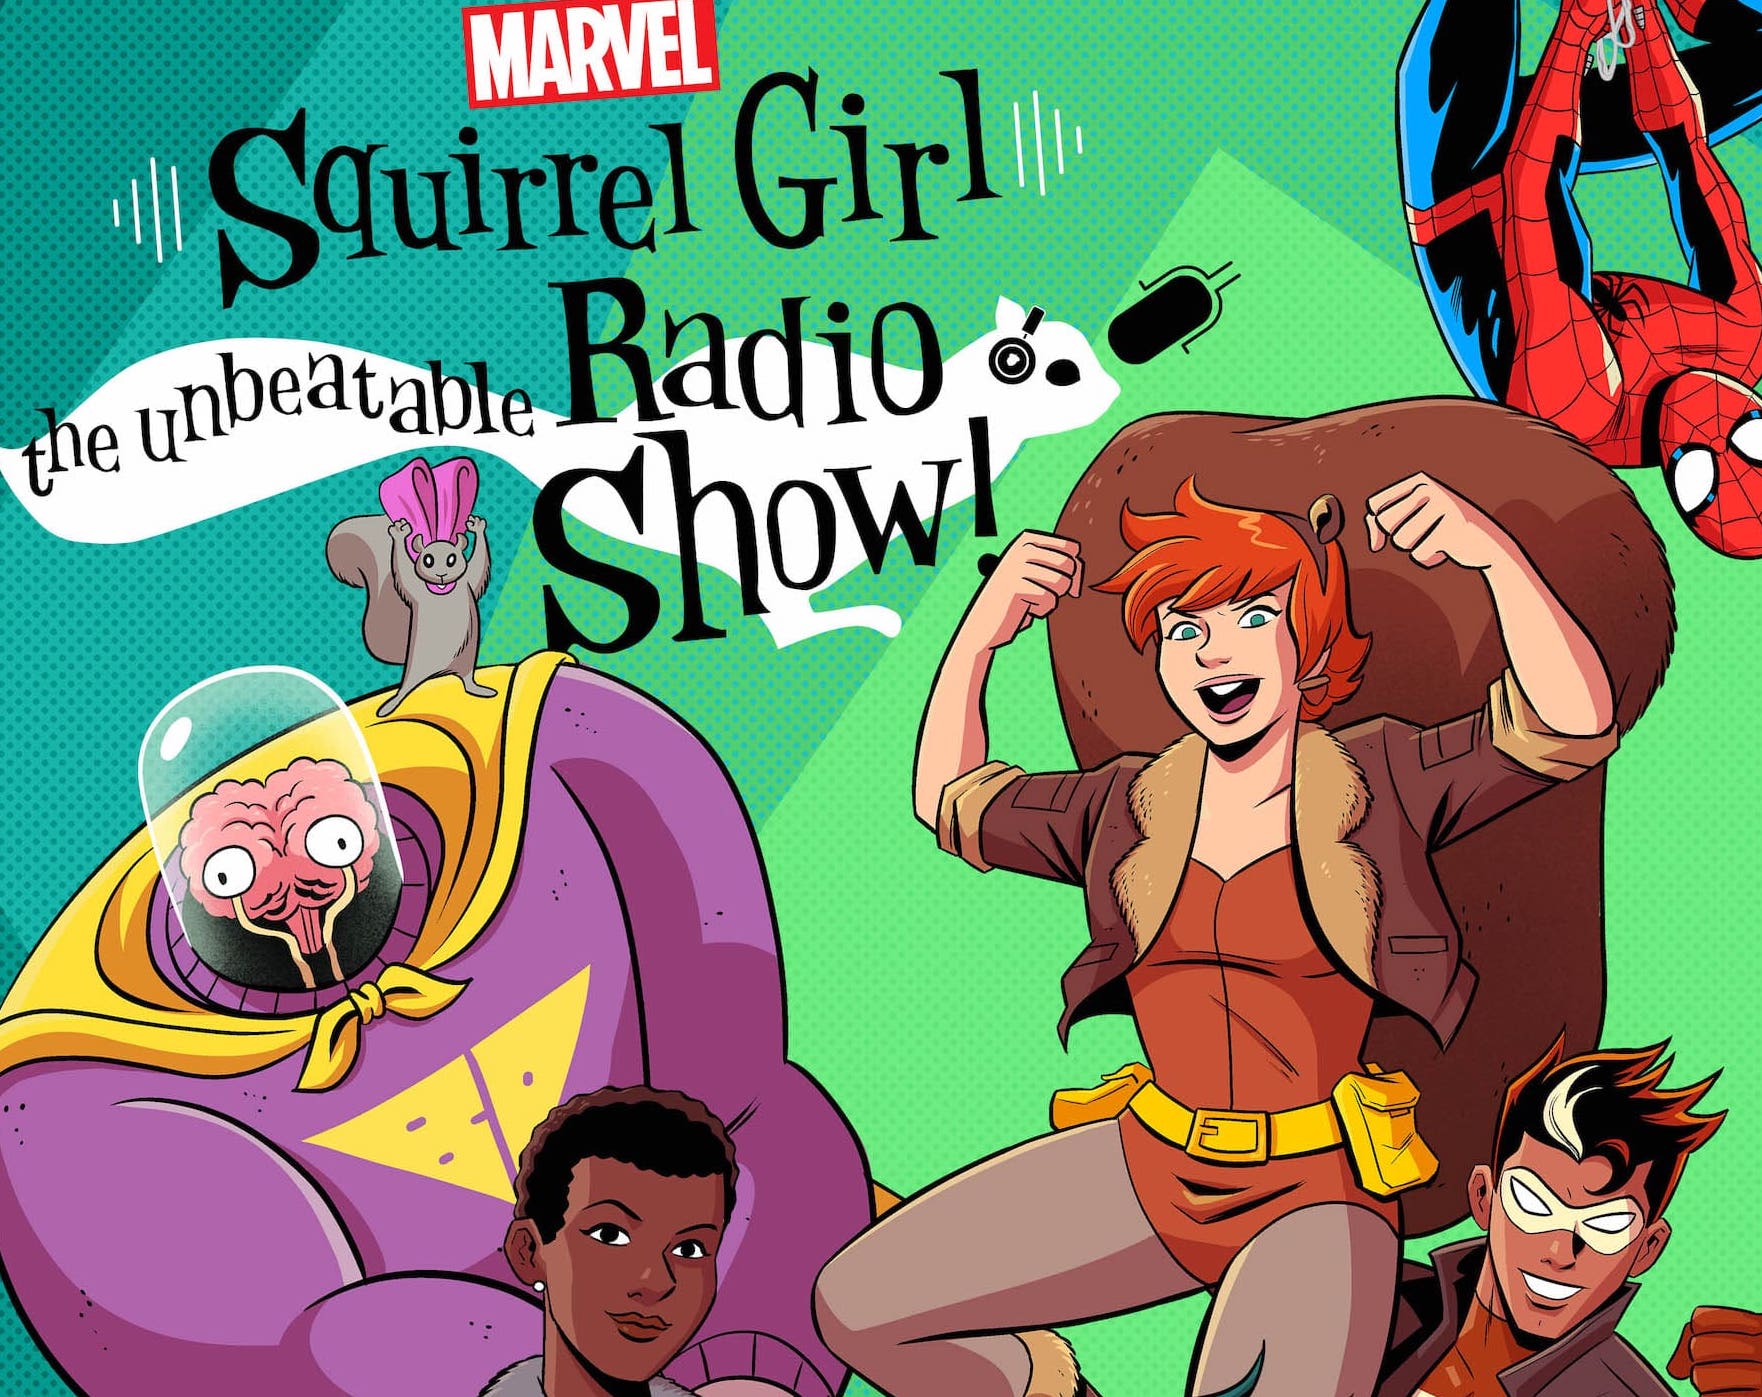 Ryan North's 'Marvel’s Squirrel Girl: The Unbeatable Radio Show!' launches today